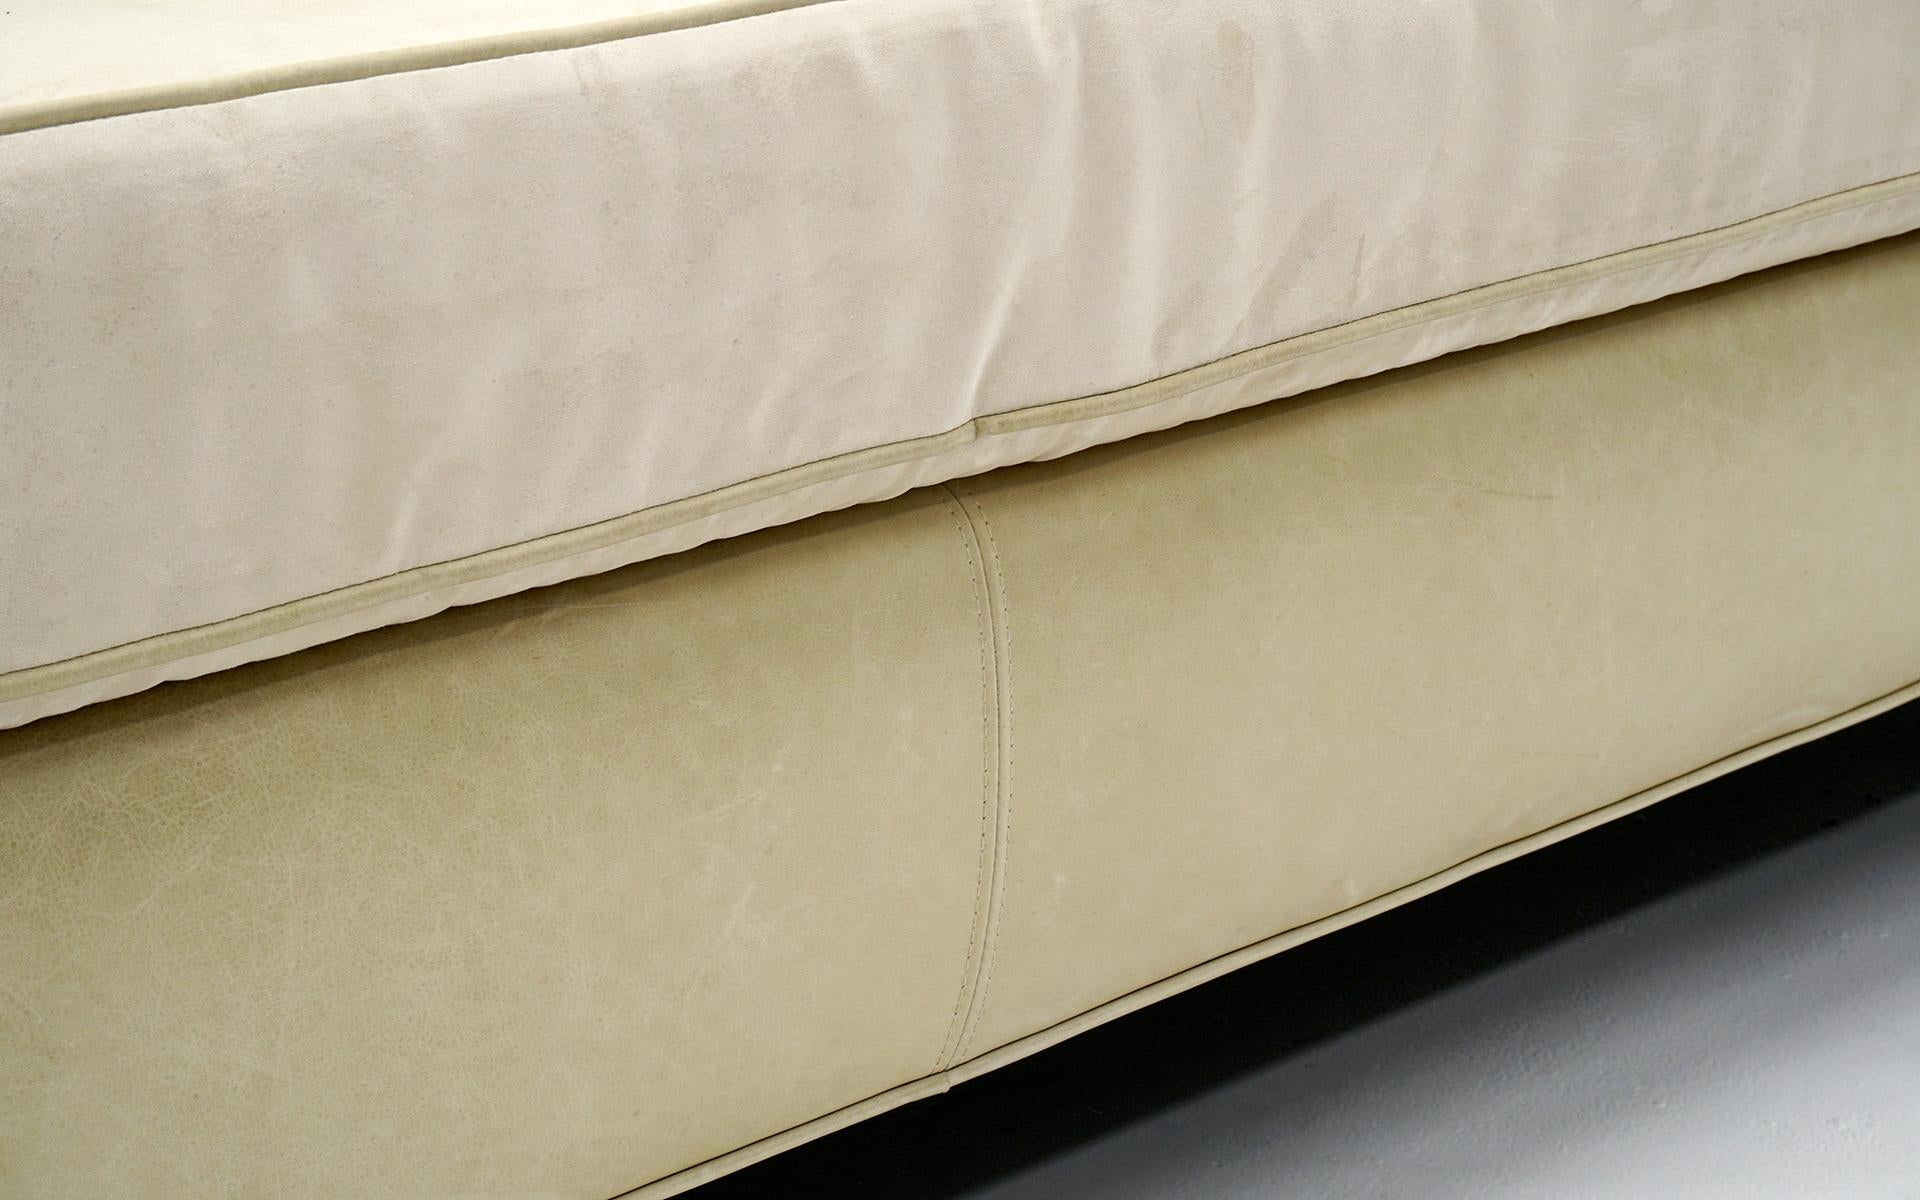 American Sofa in Off White /Beige Leather with Mohair Cushions by Niedermaier, Chicago